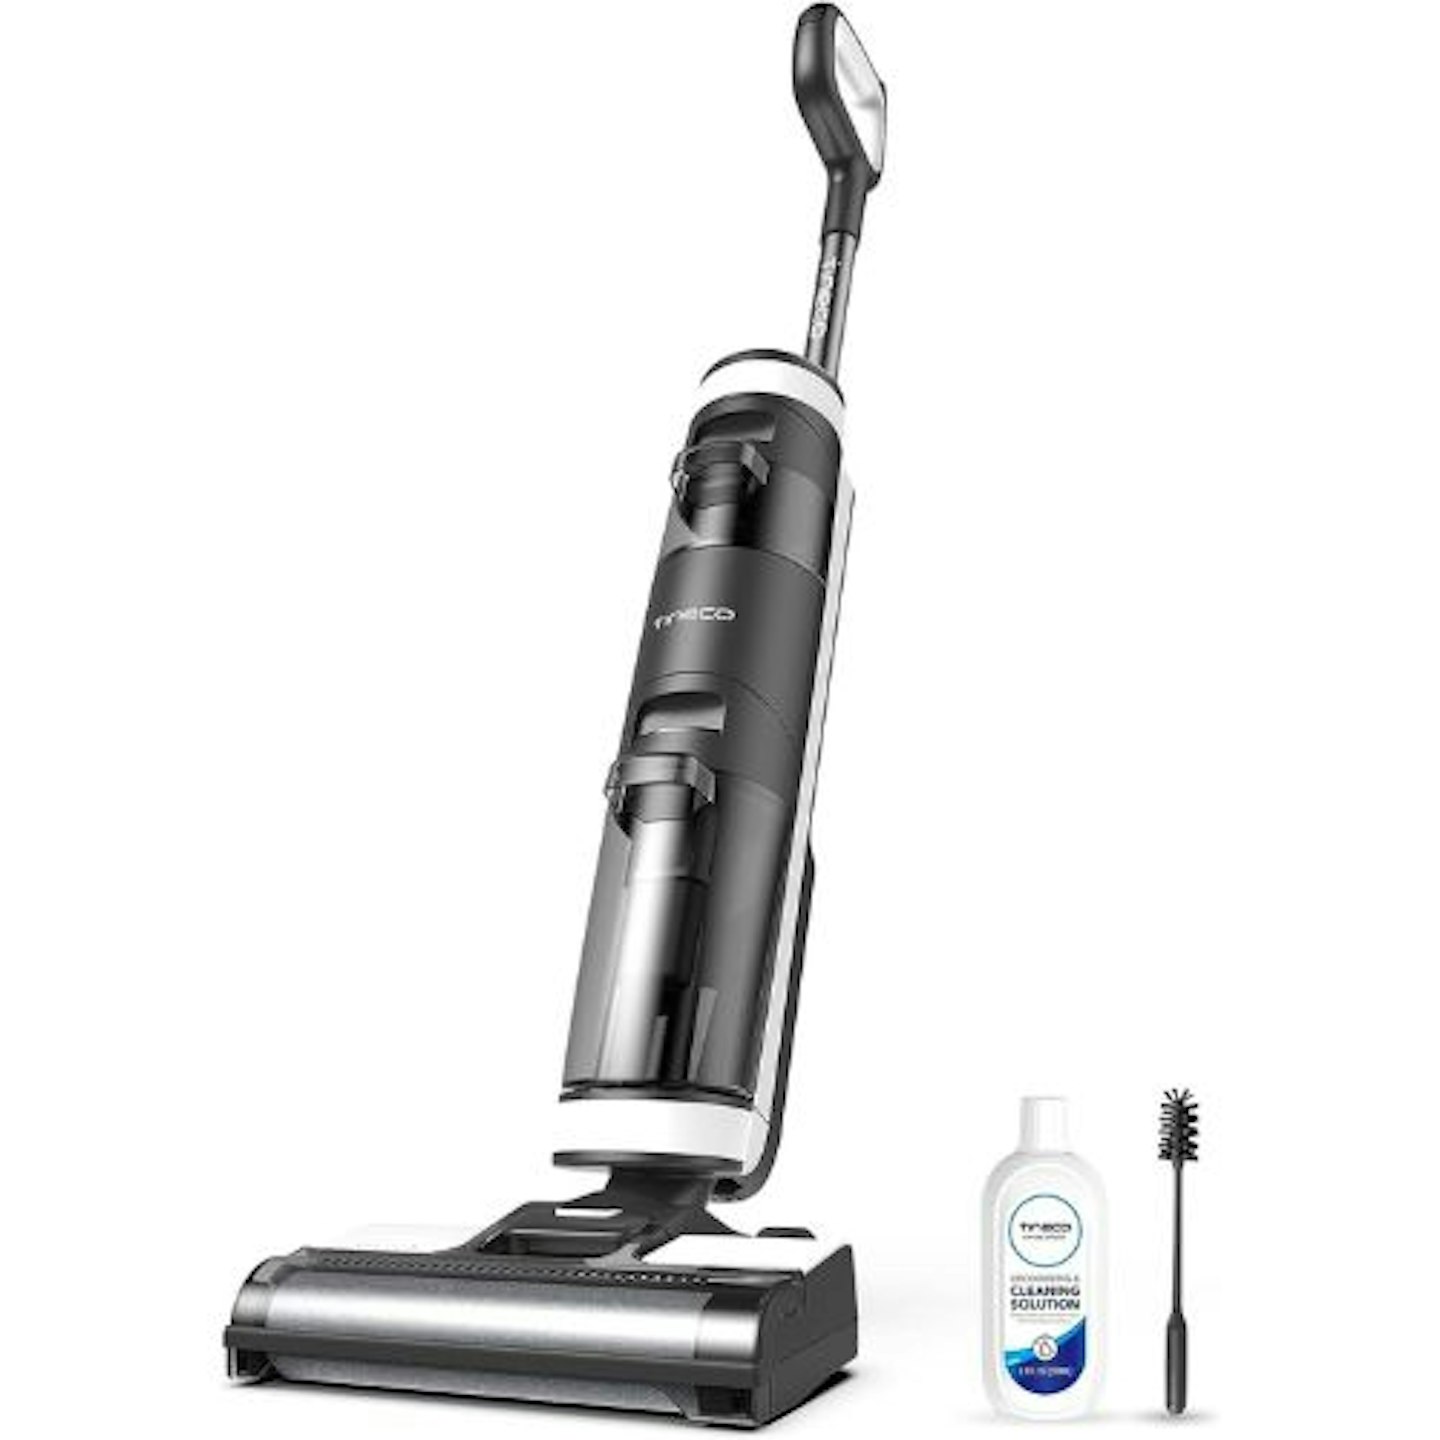 2024 A GOOD HELPER FOR HOME CLEANING AFTER A HEARTBREAK. ft.Honiture  Cordless Vacuum cleaner s15 